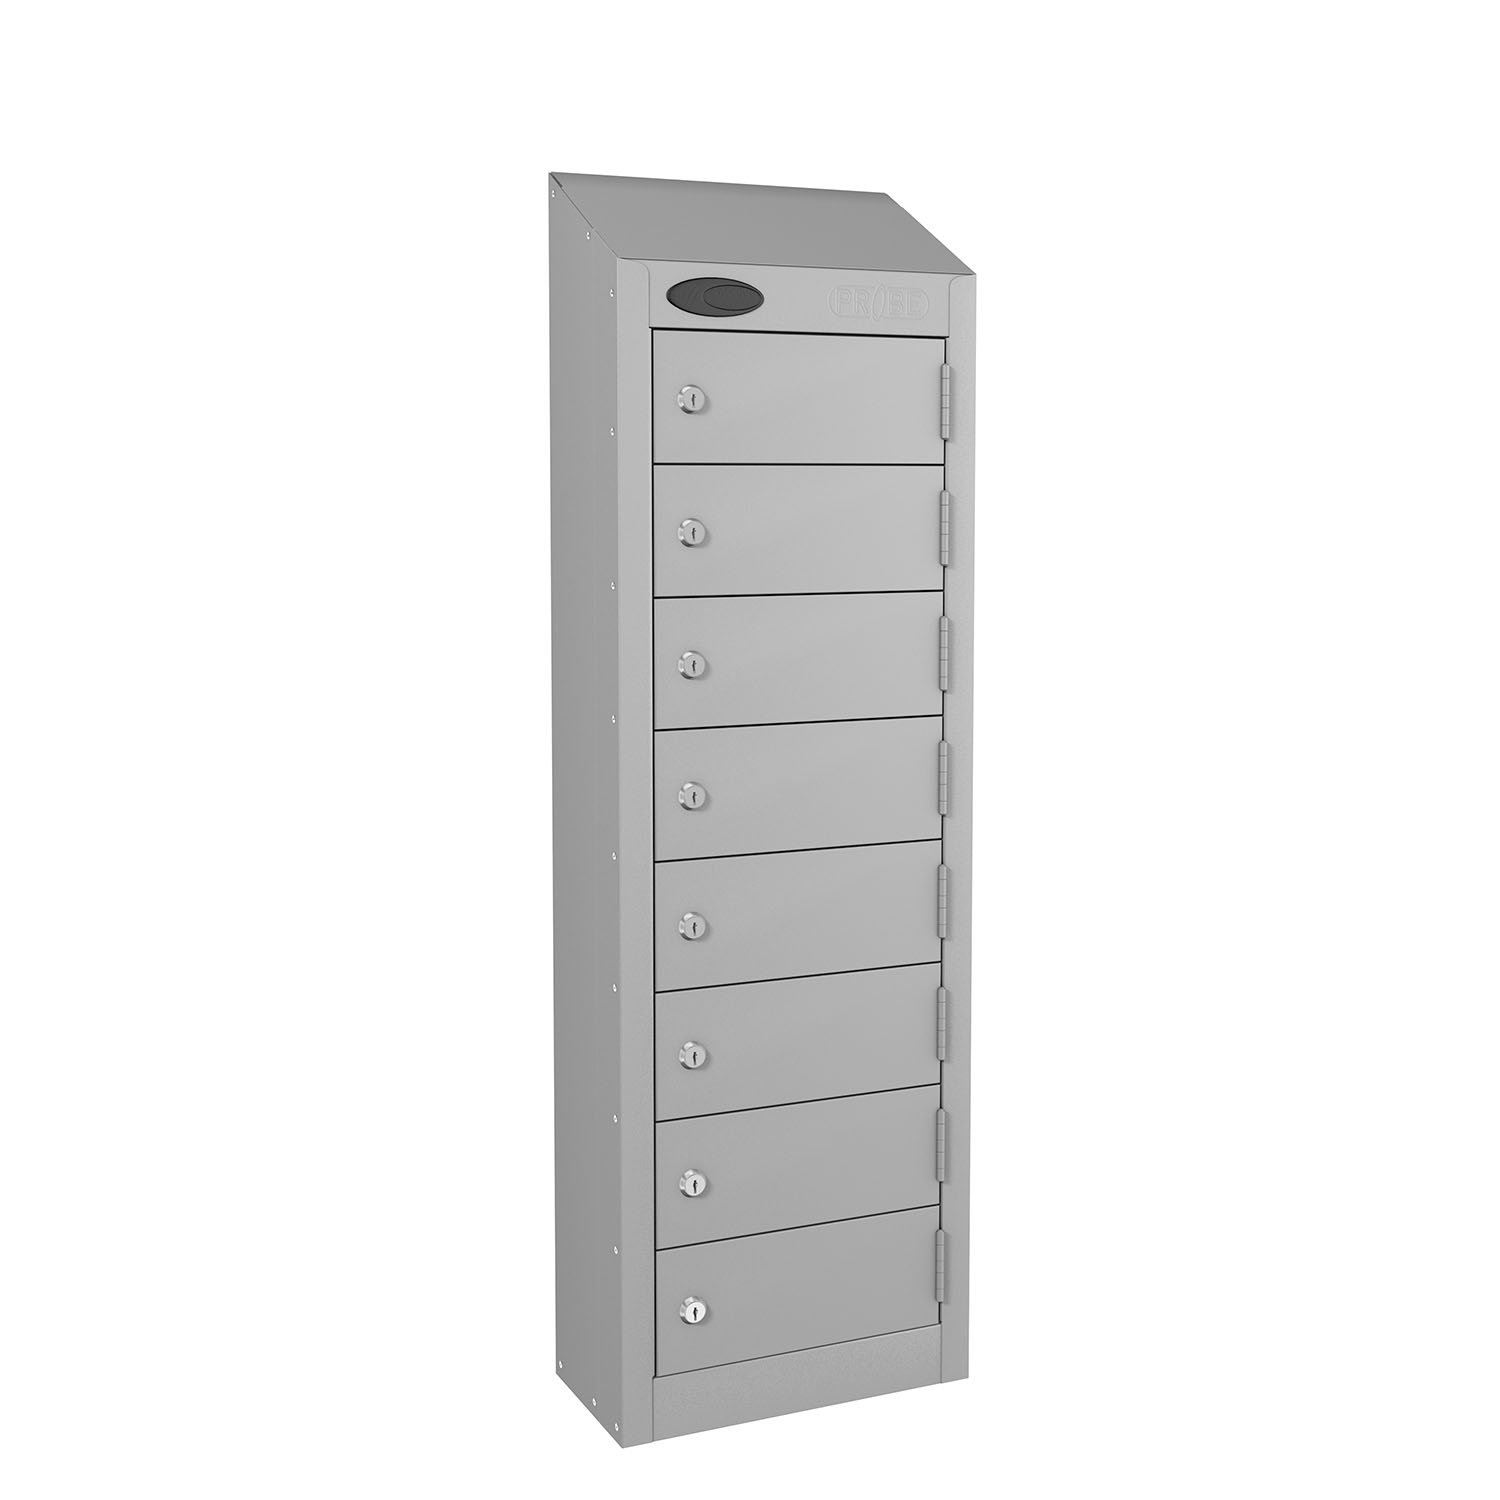 Probe 8 doors small compartment personal lockers in sliver colour